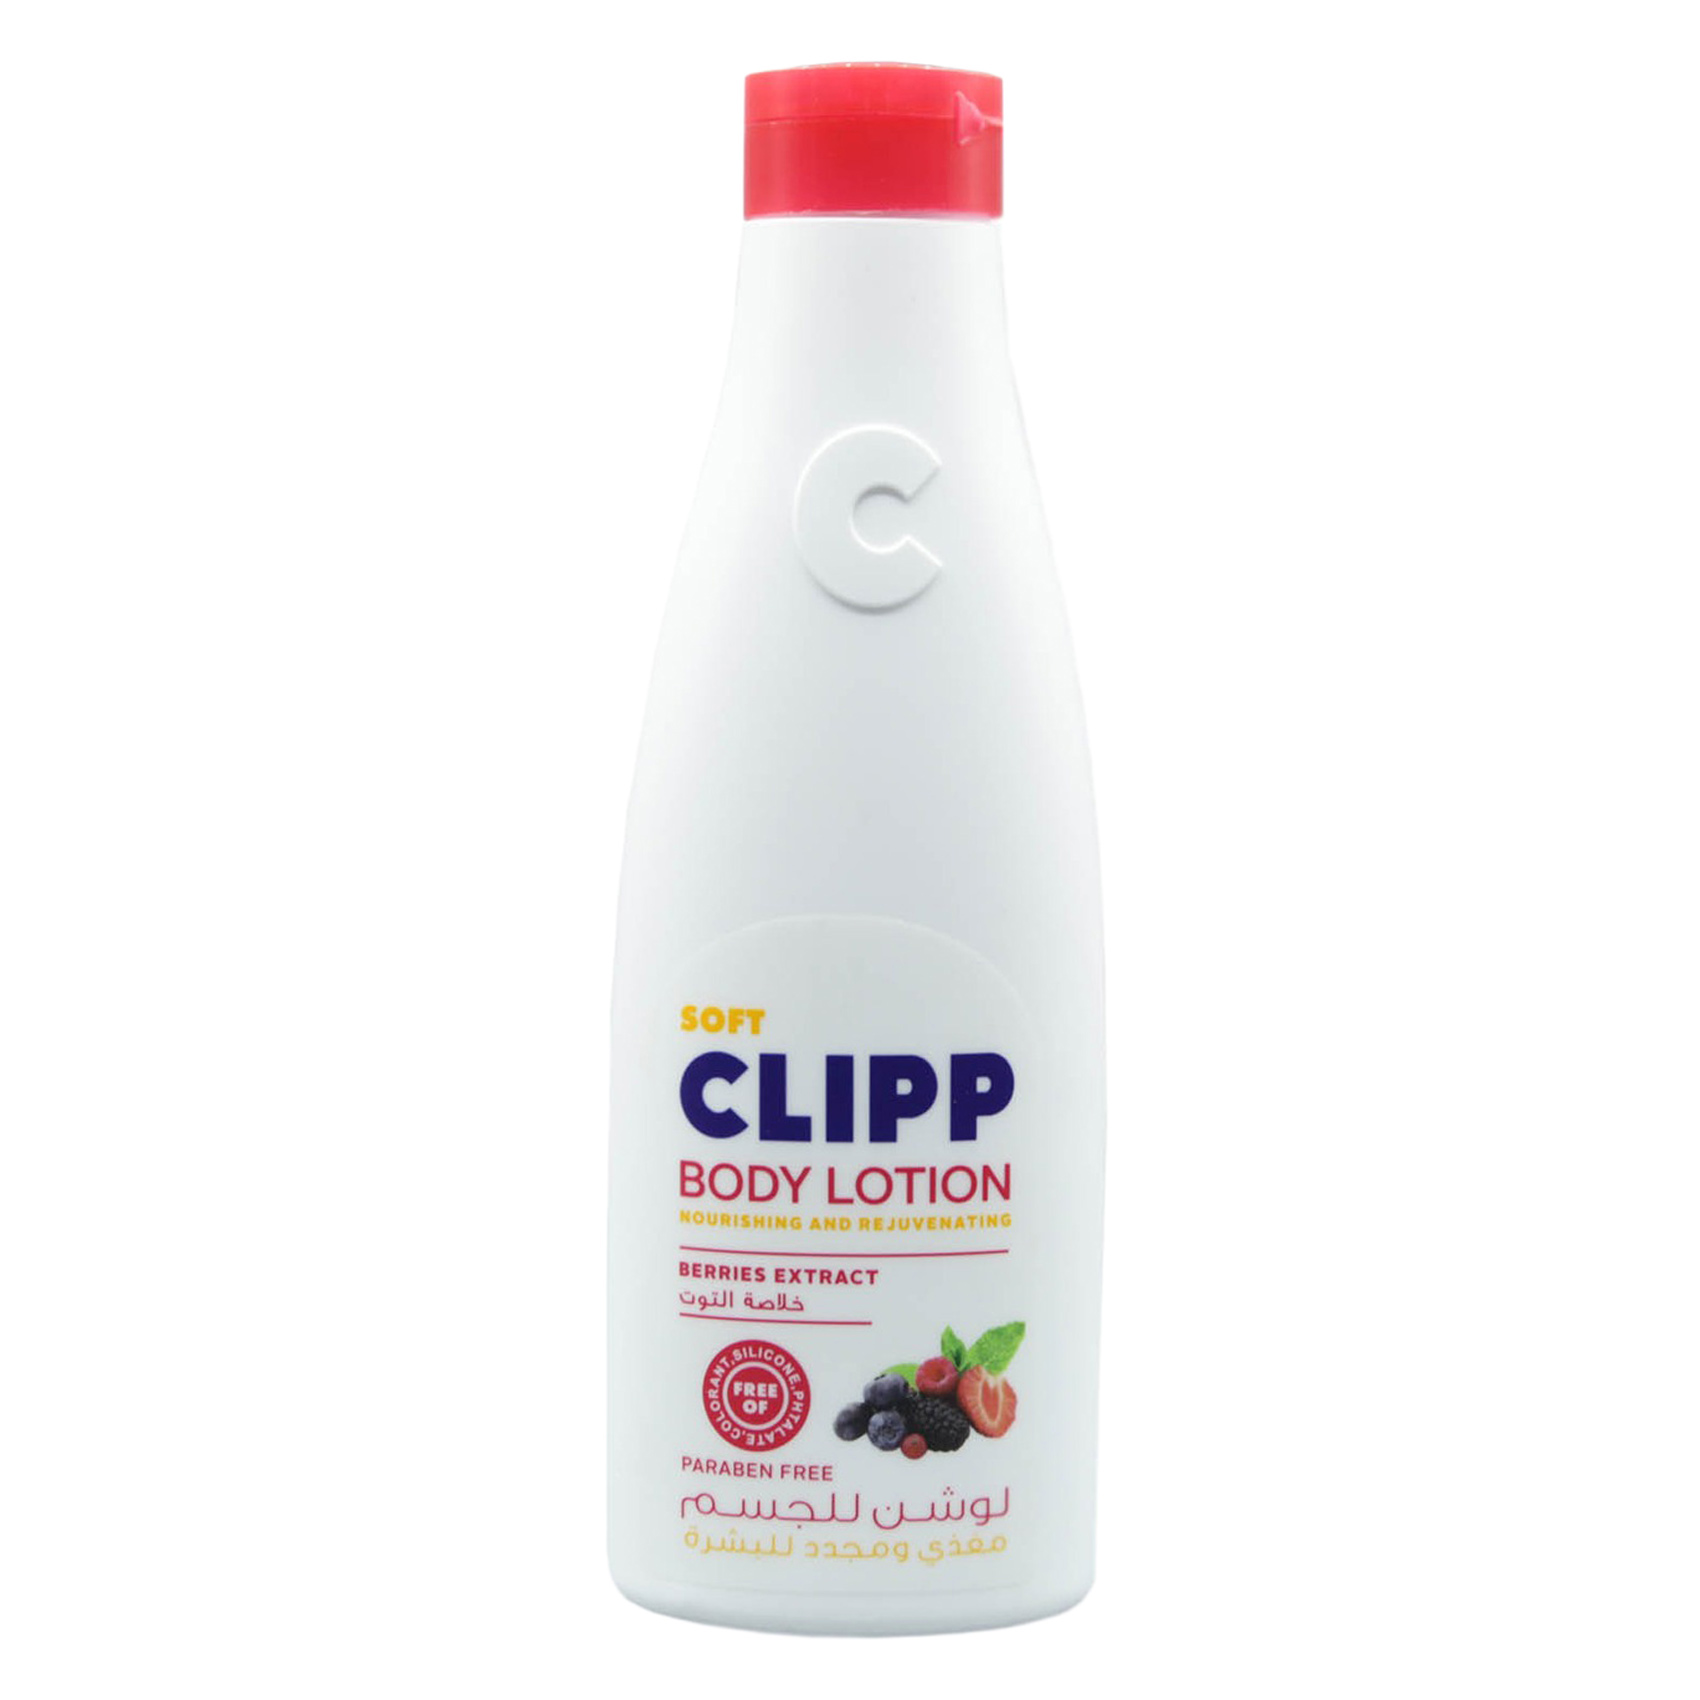 Clipp Berries Extract Nourishing And Rejuvenating Skin Body Lotion 250ml